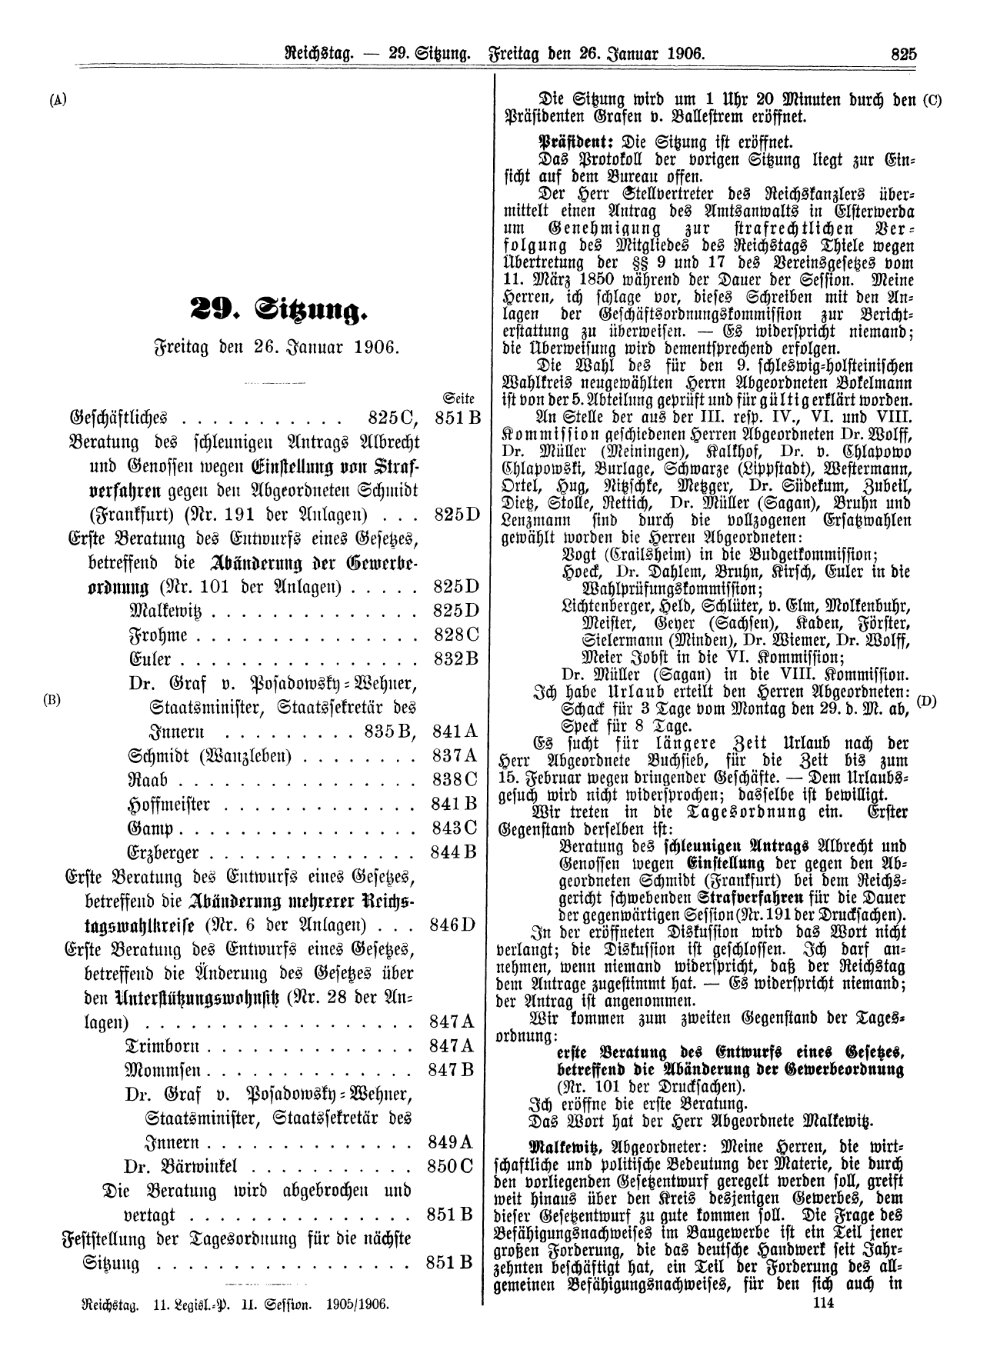 Scan of page 825